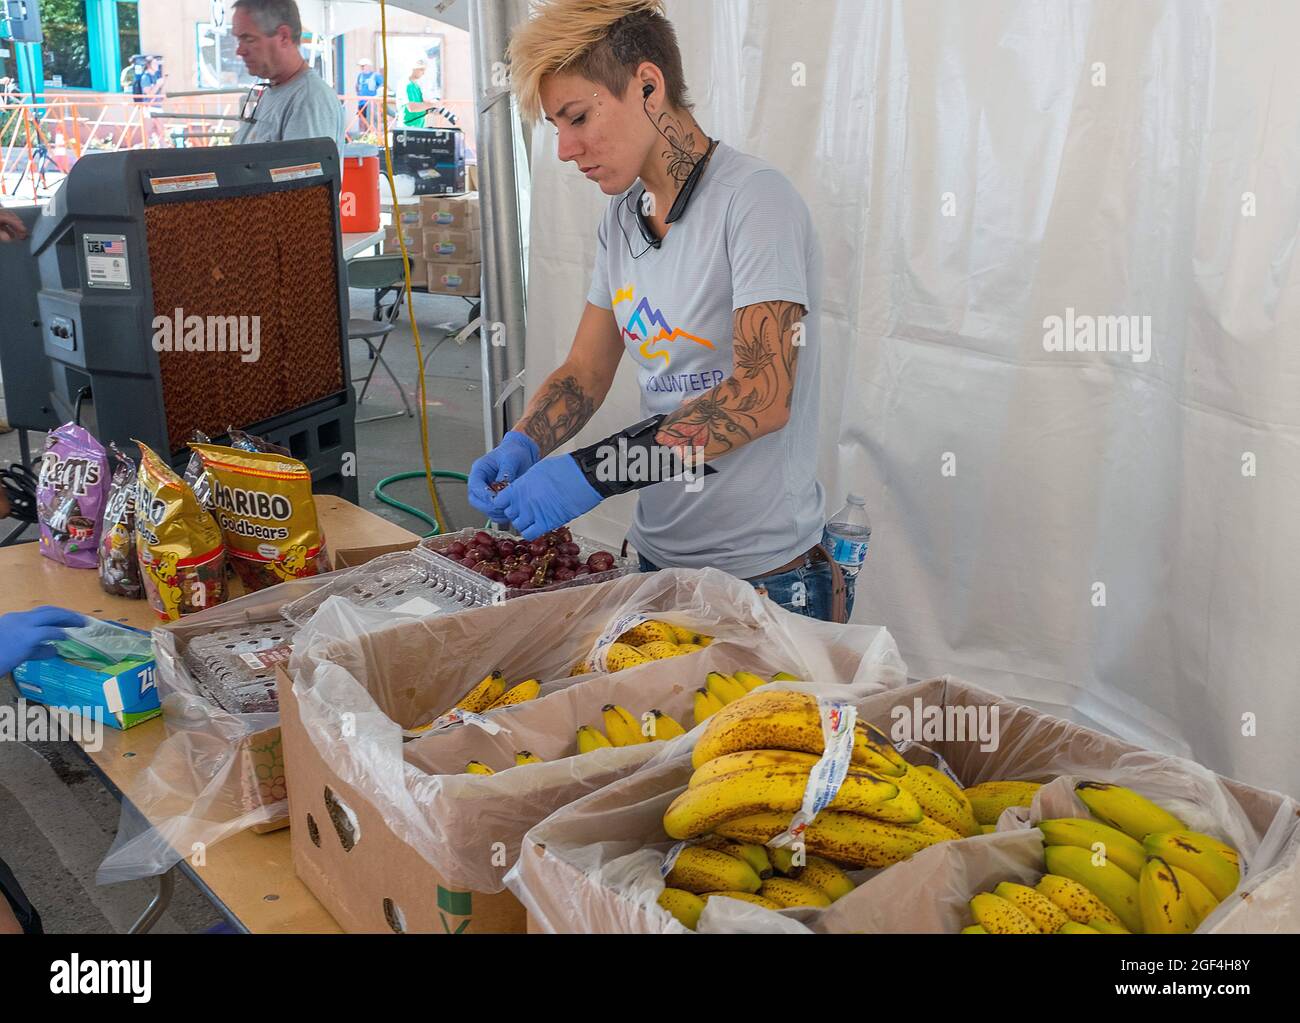 August 22, 2021: Race volunteers prepare food and hydration for mountain runners prior to the Pikes Peak Marathon, Manitou Springs, Colorado. Stock Photo